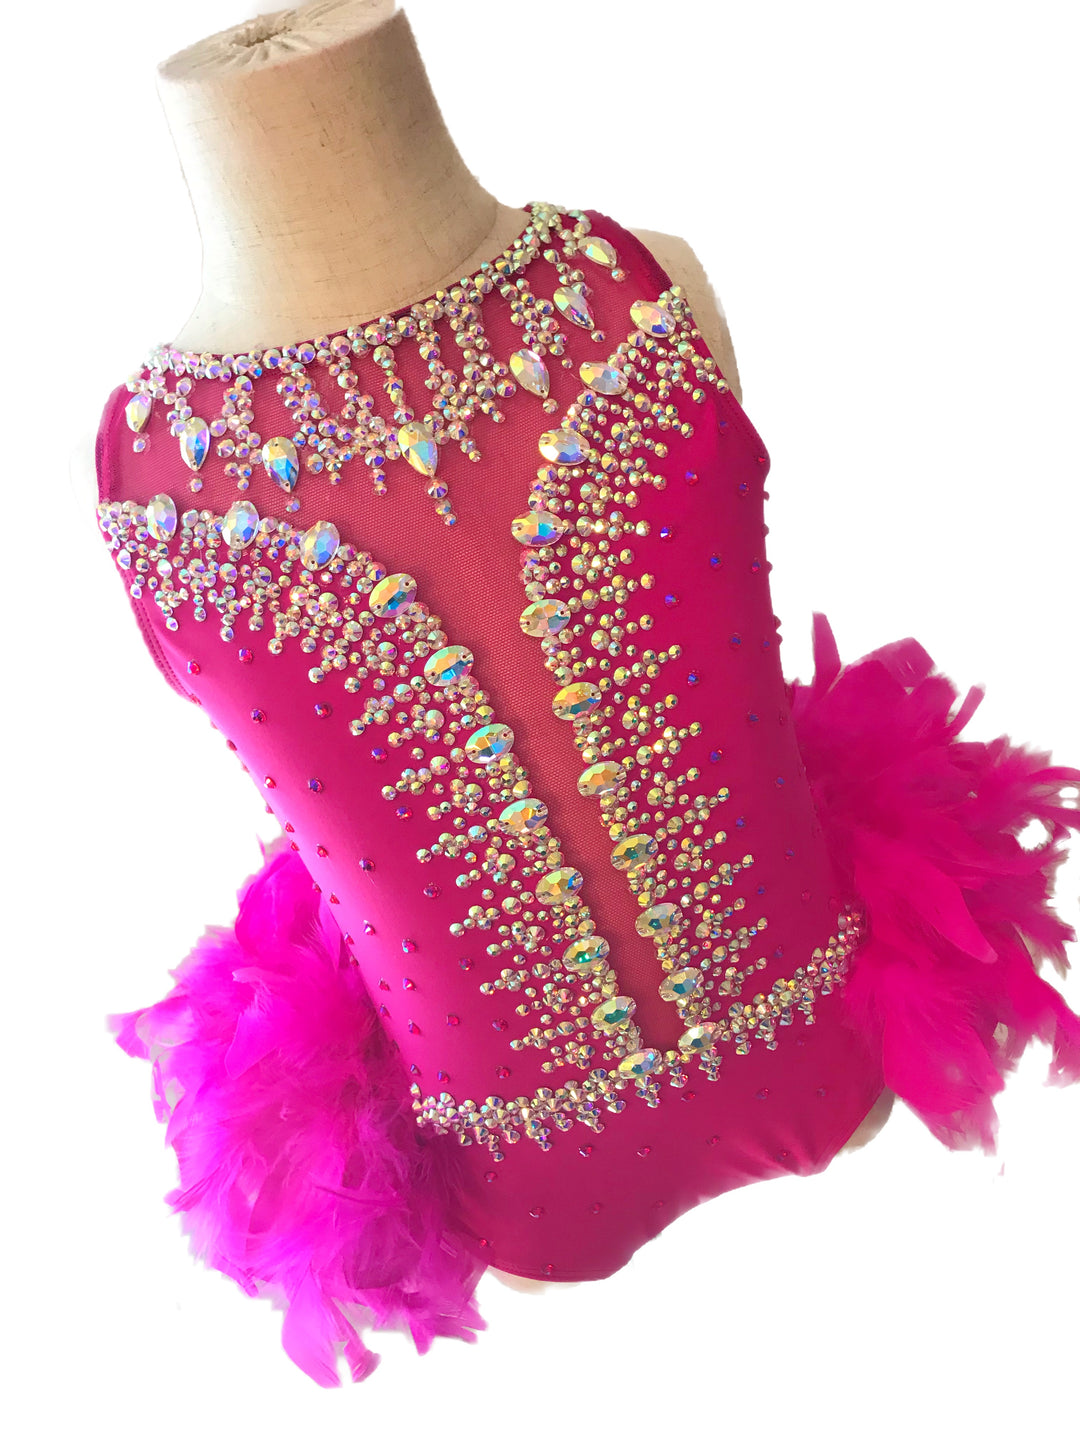 CHILD MEDIUM new hot pink dance competition costume jazz or musical theater